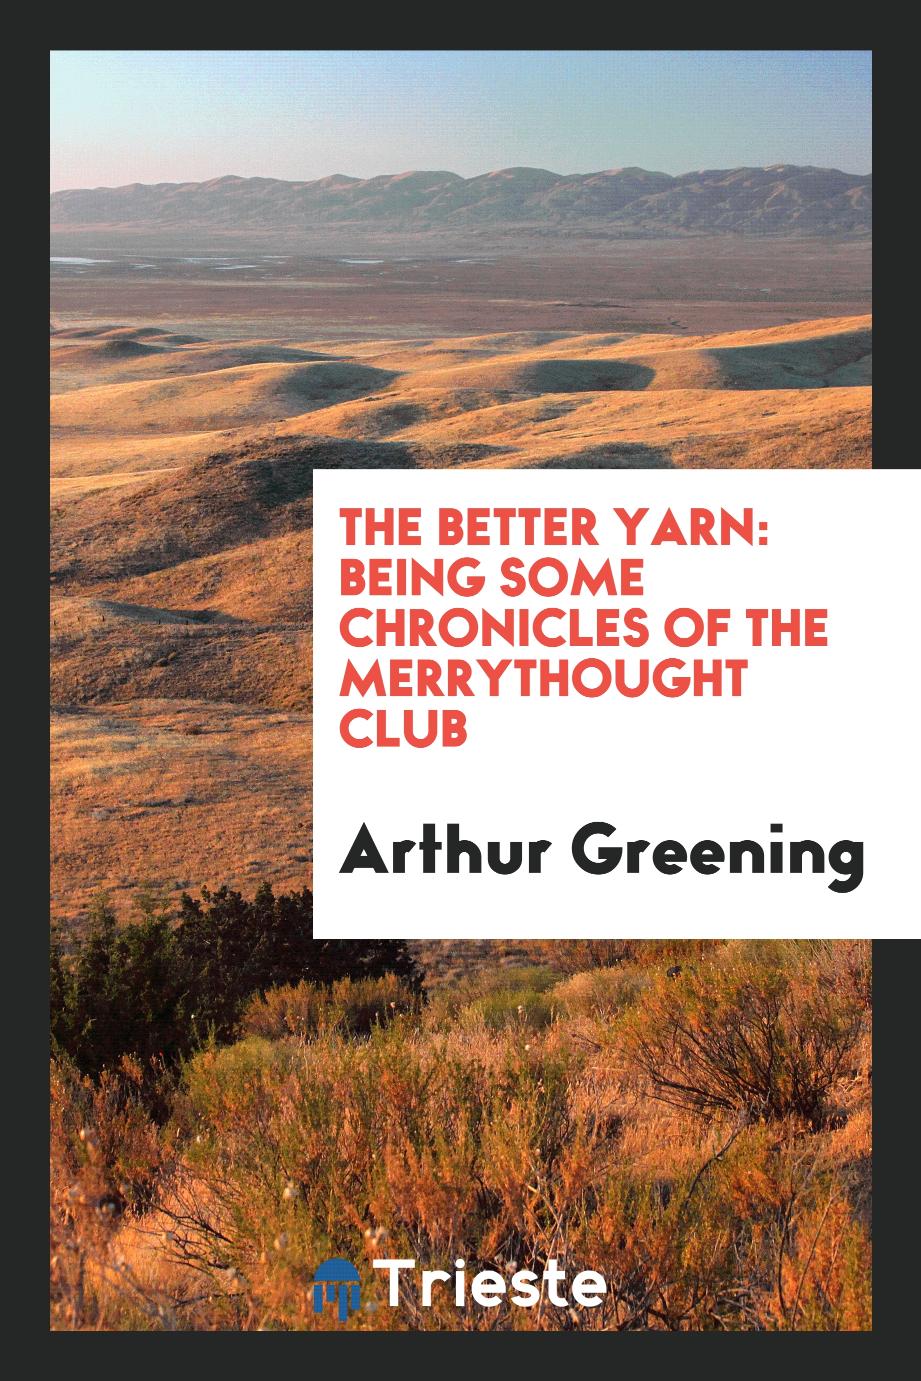 The better yarn: being some chronicles of the Merrythought Club